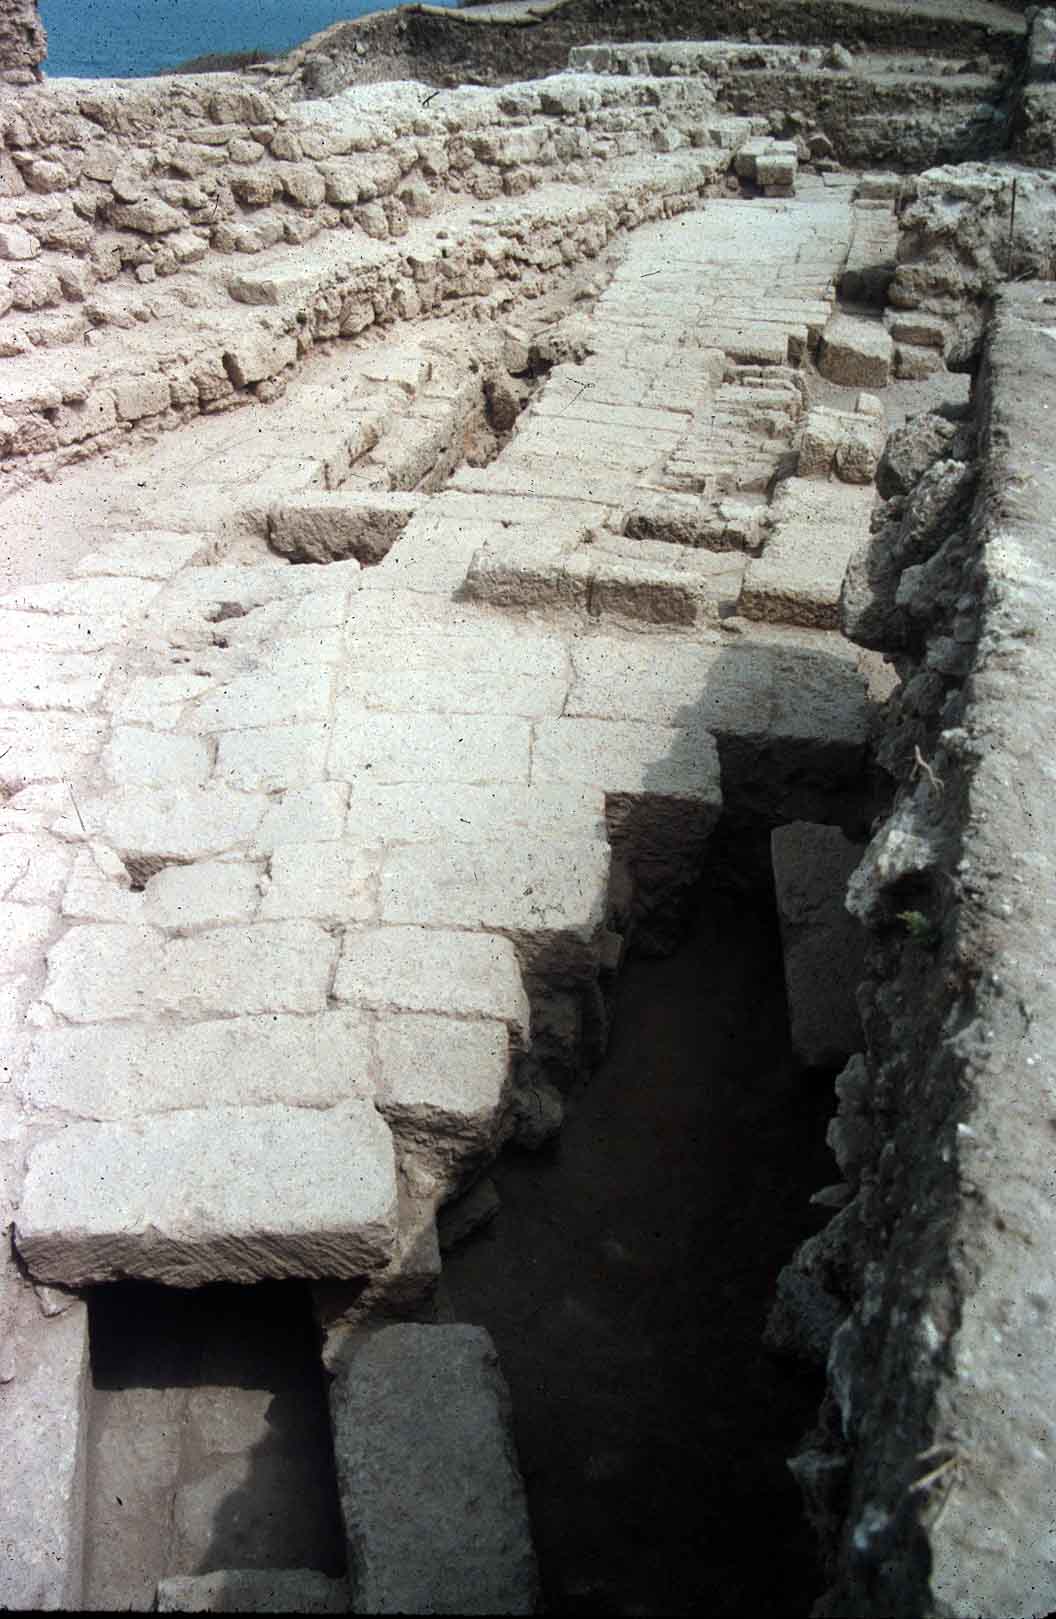 The early Roman street and its sewer overlayed by the temple's retaining wall (left)